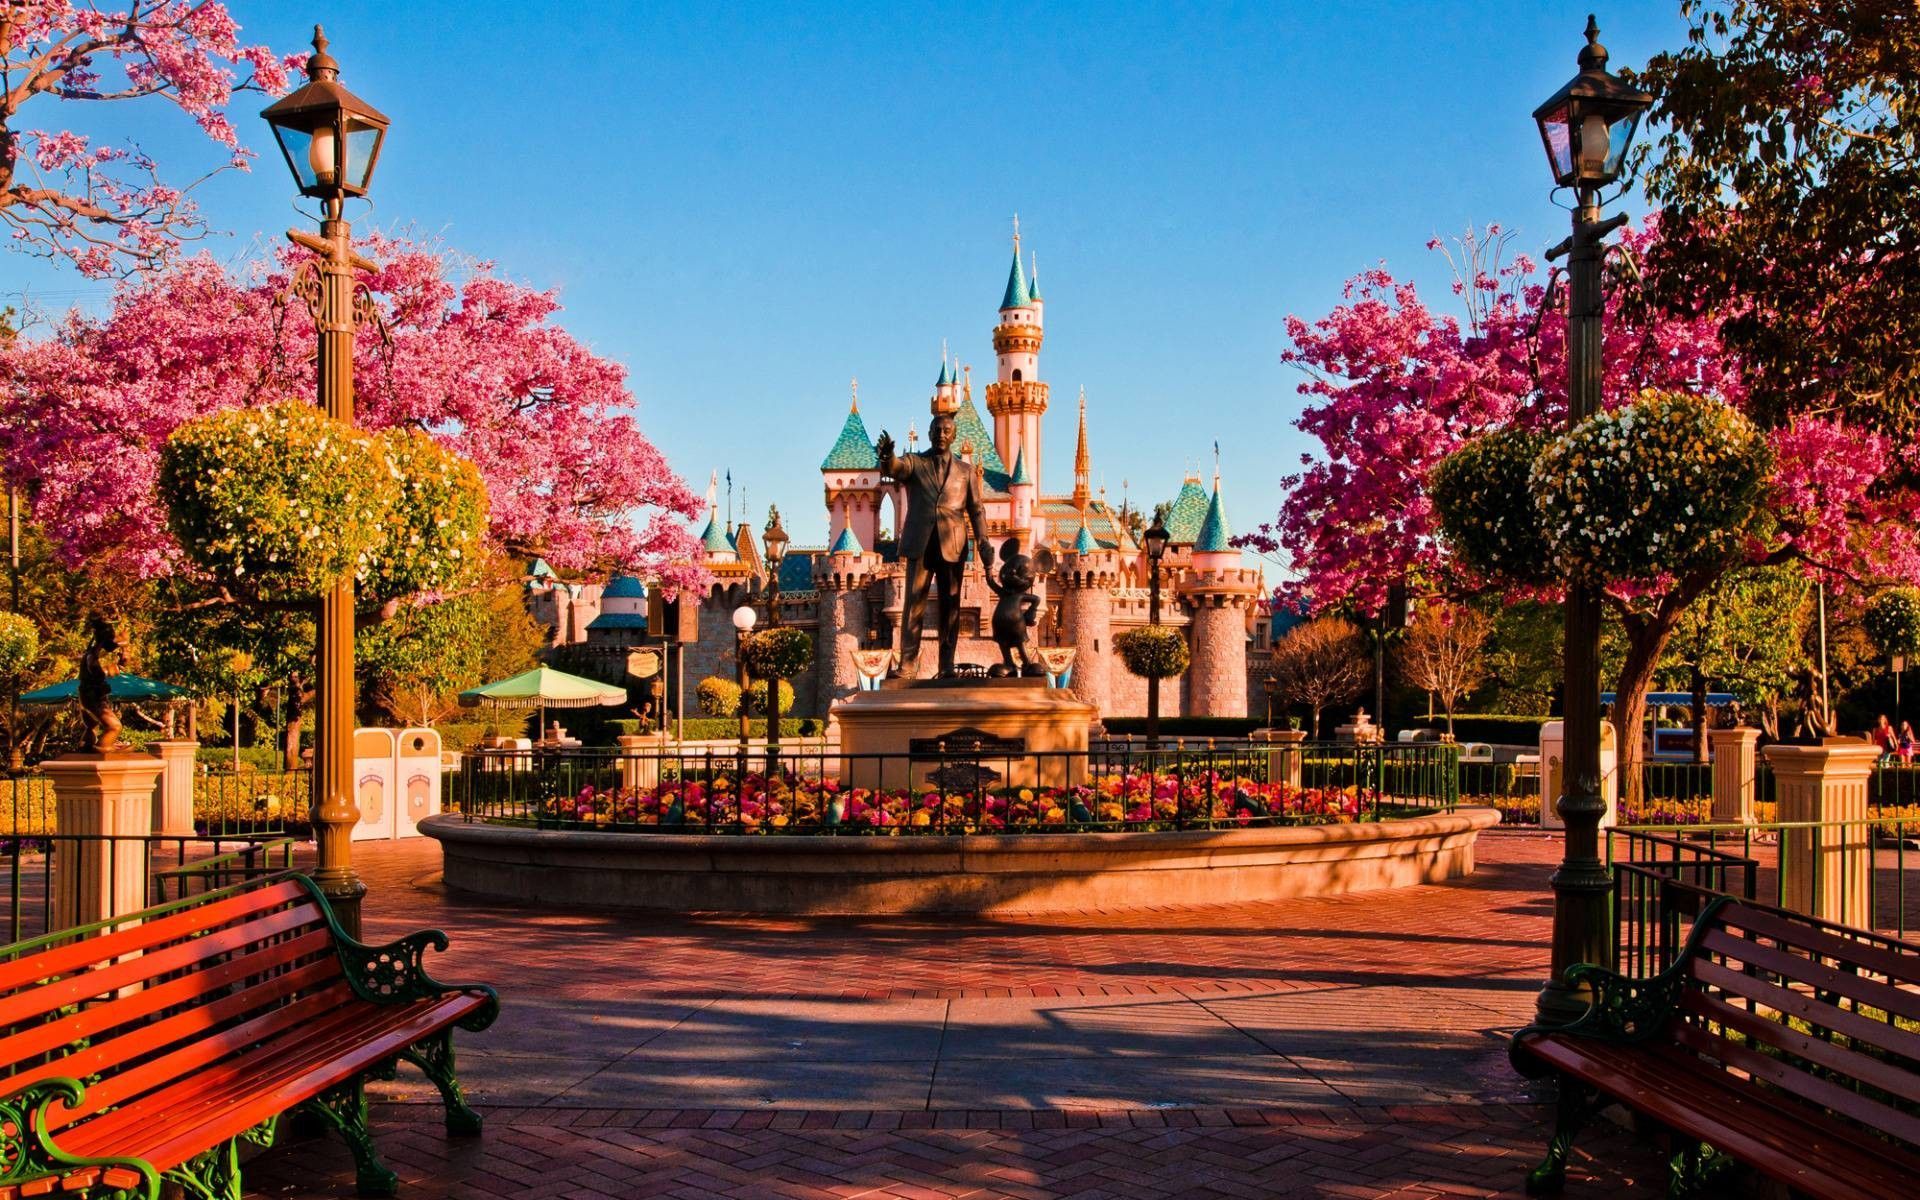 A beautiful view of Disneyland with a pink blooming tree in the foreground and a beautiful castle in the background. - Disneyland